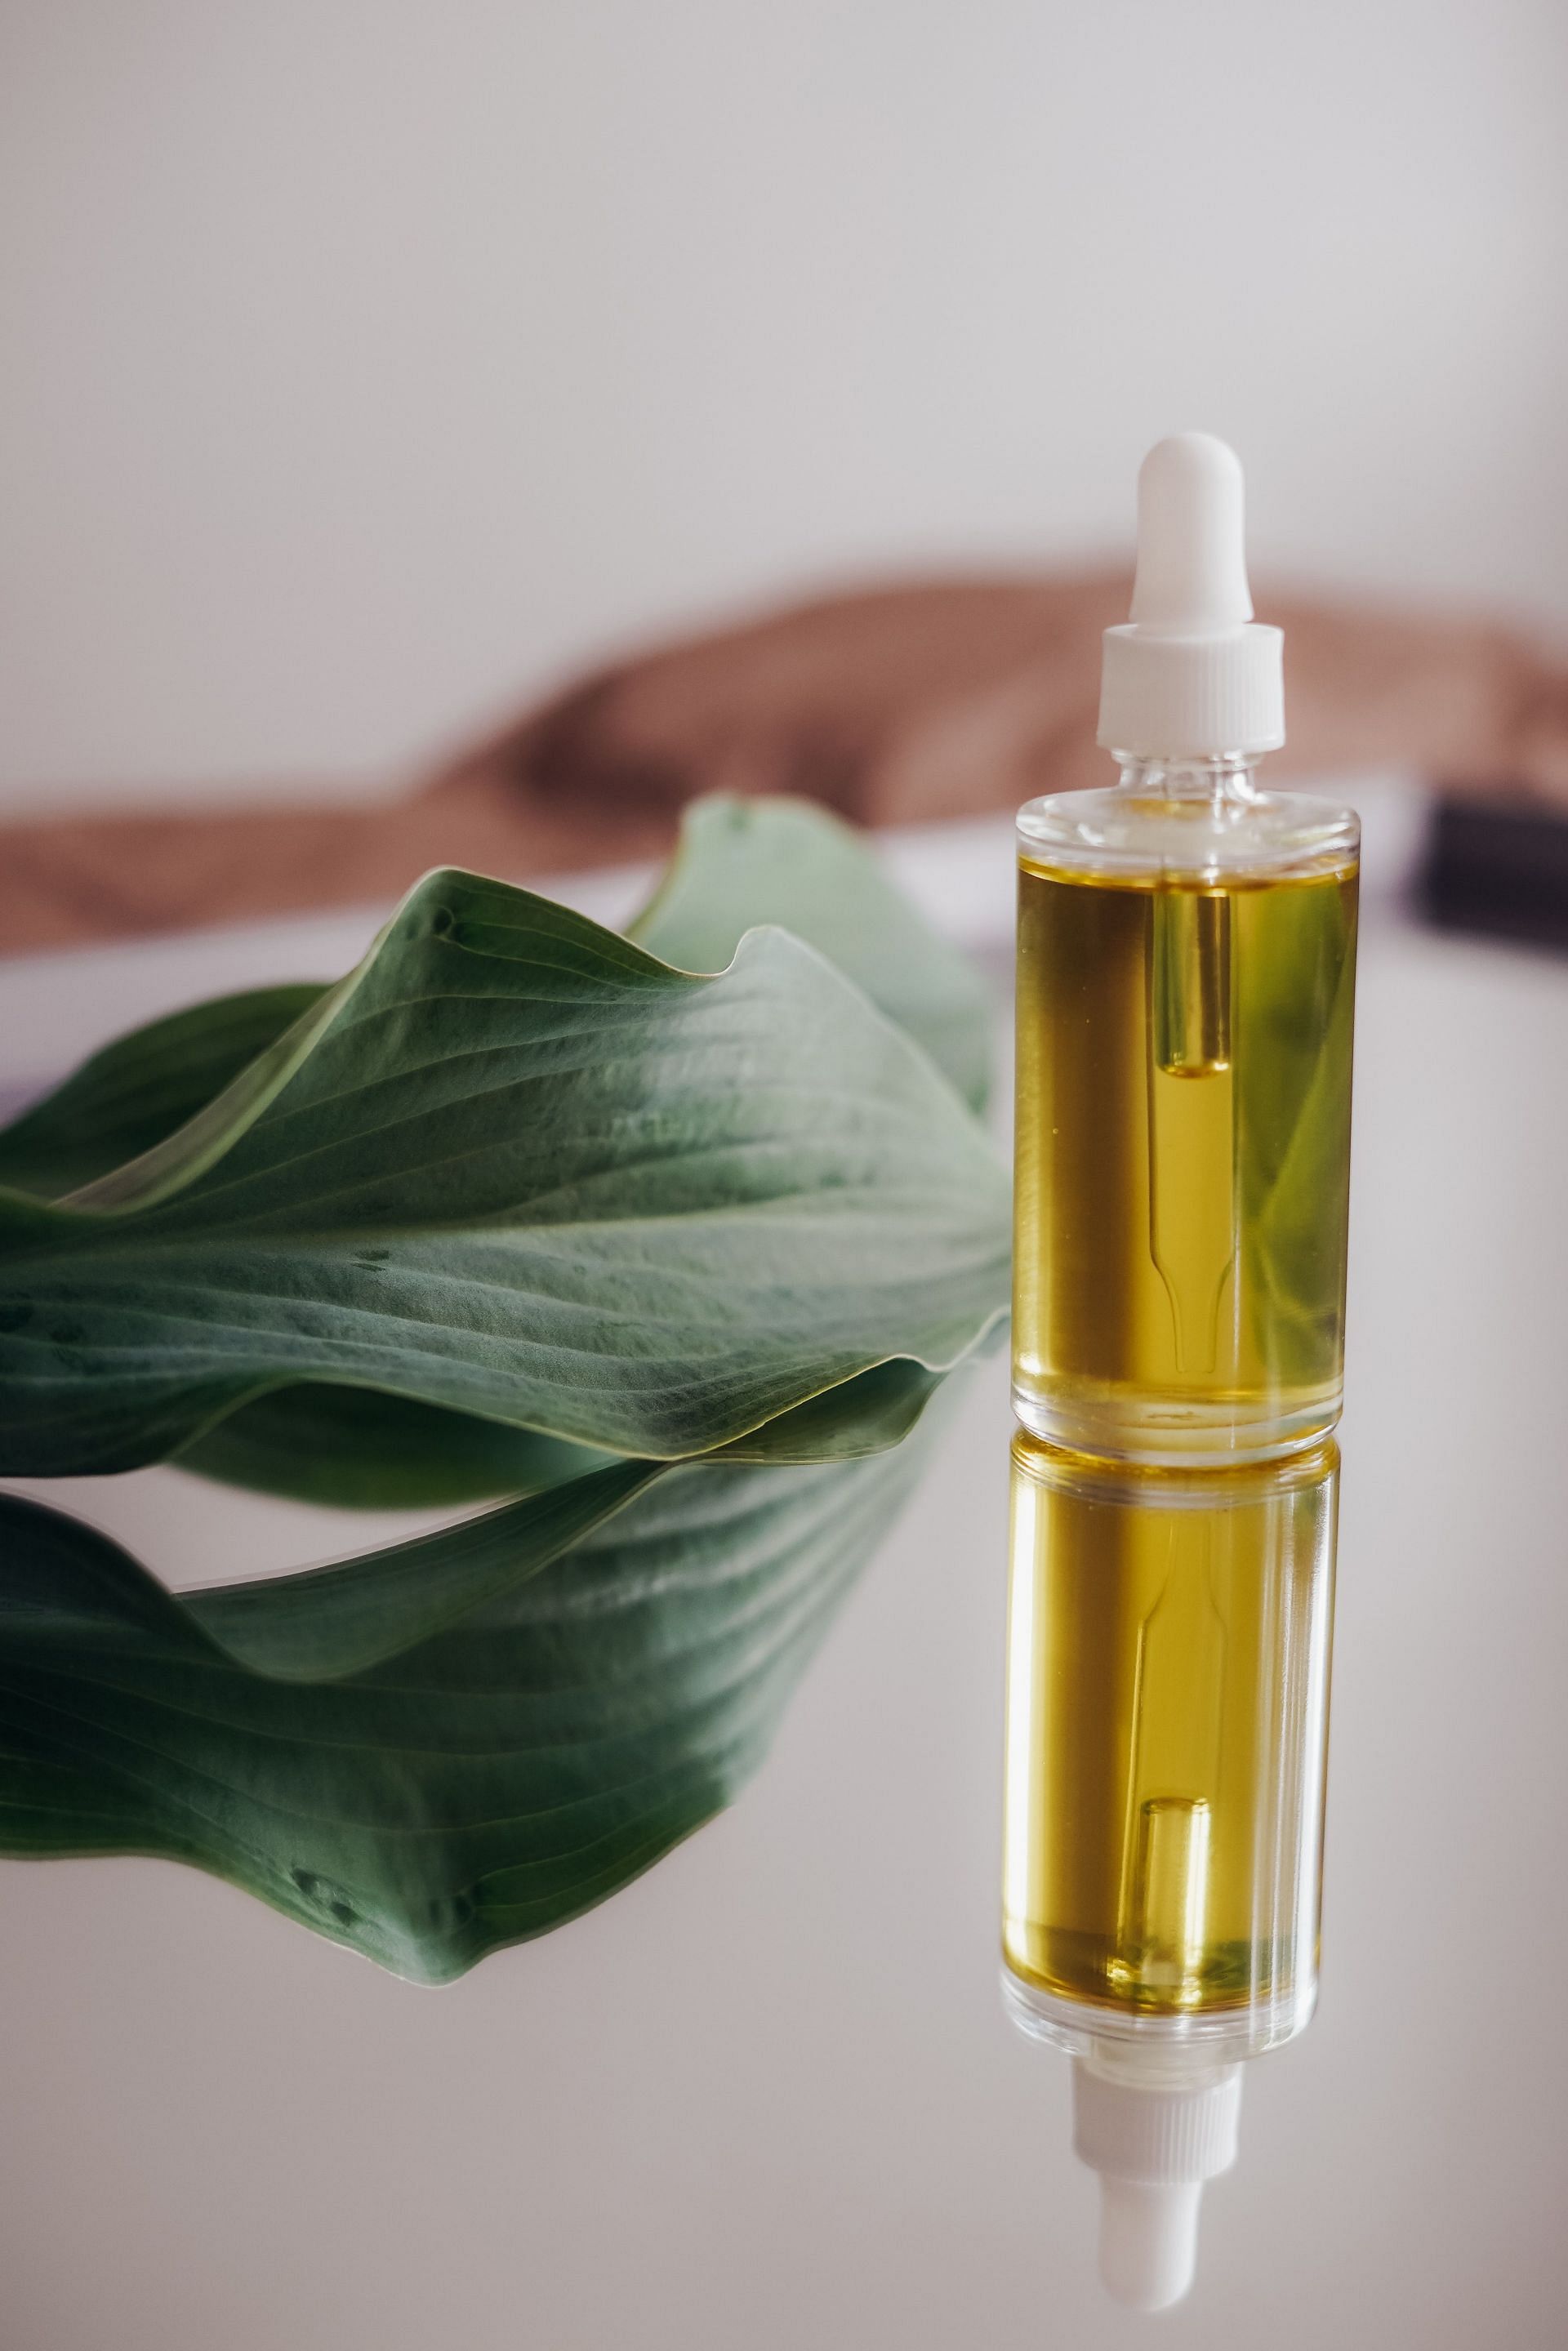 The Top 5 Hair Oils for Hair Growth and Thickness (Image via Pexels)